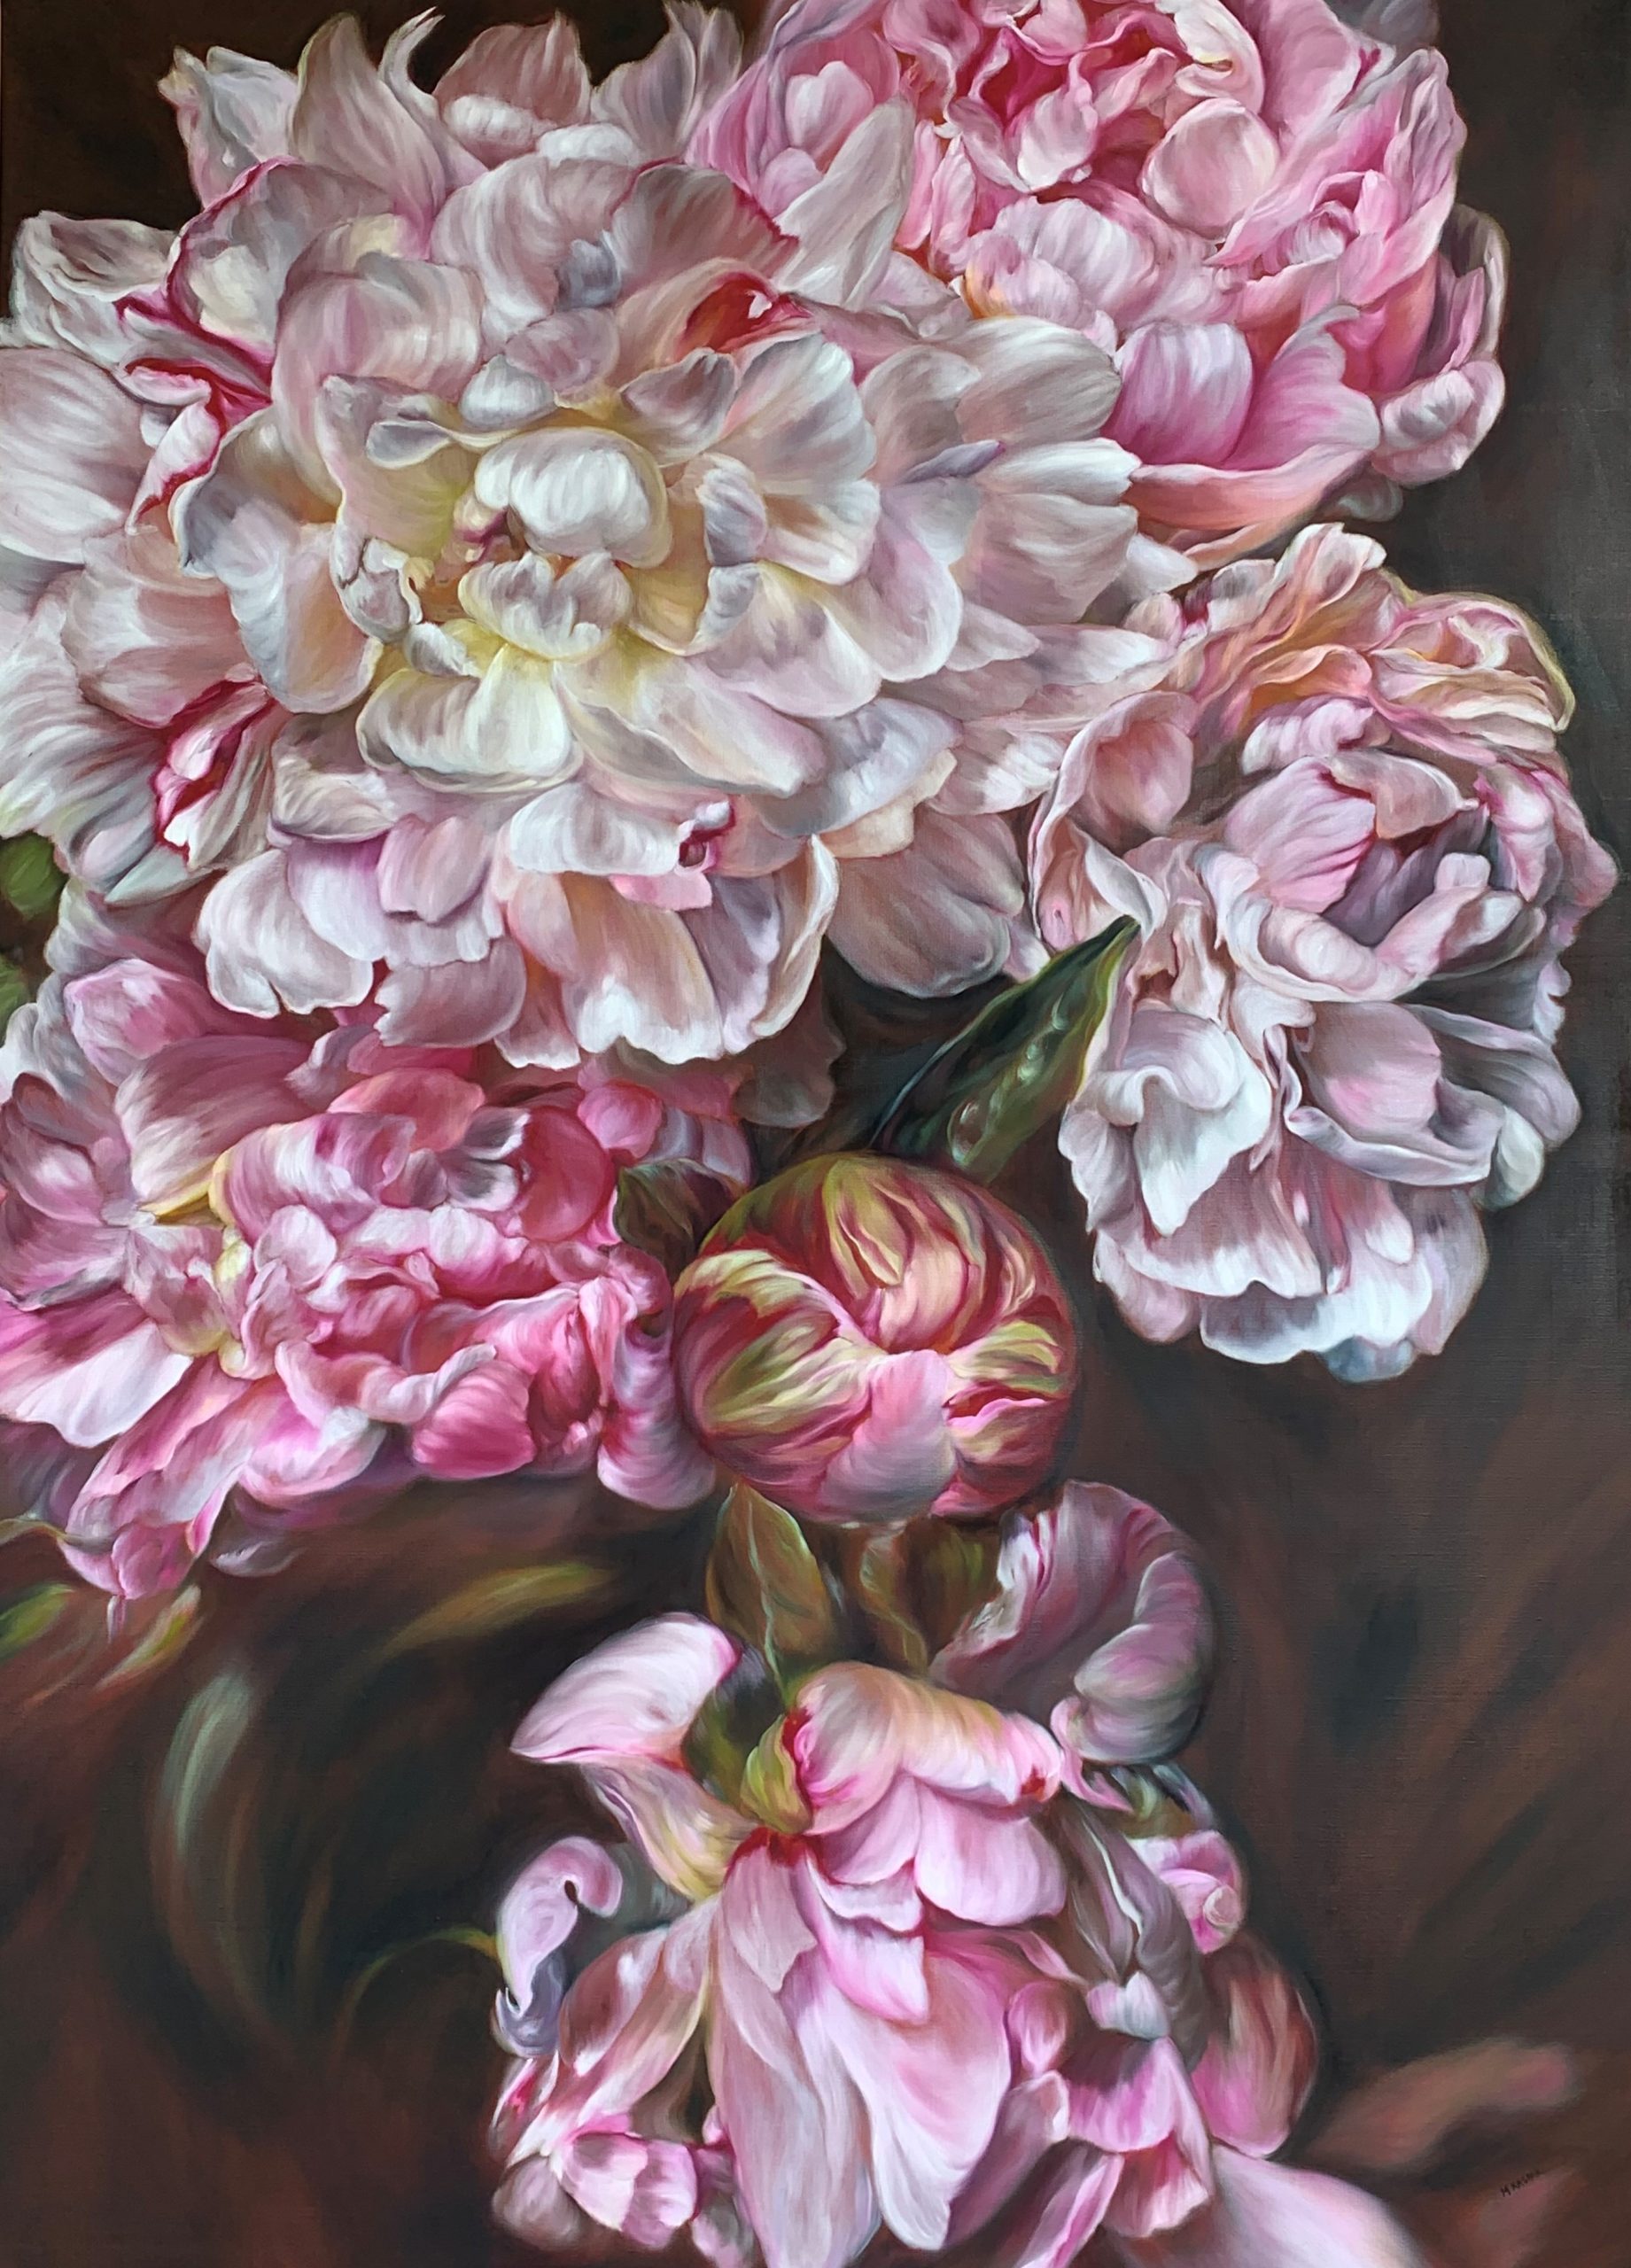 Marcella Kaspar, 'Peonies 1', oil on linen, 122 x168cm, $22,000 | Corporate Collection, Sydney; Purchased Charles Hewitt Gallery; Exhibited Charles Hewitt Gallery, Sydney (2006).